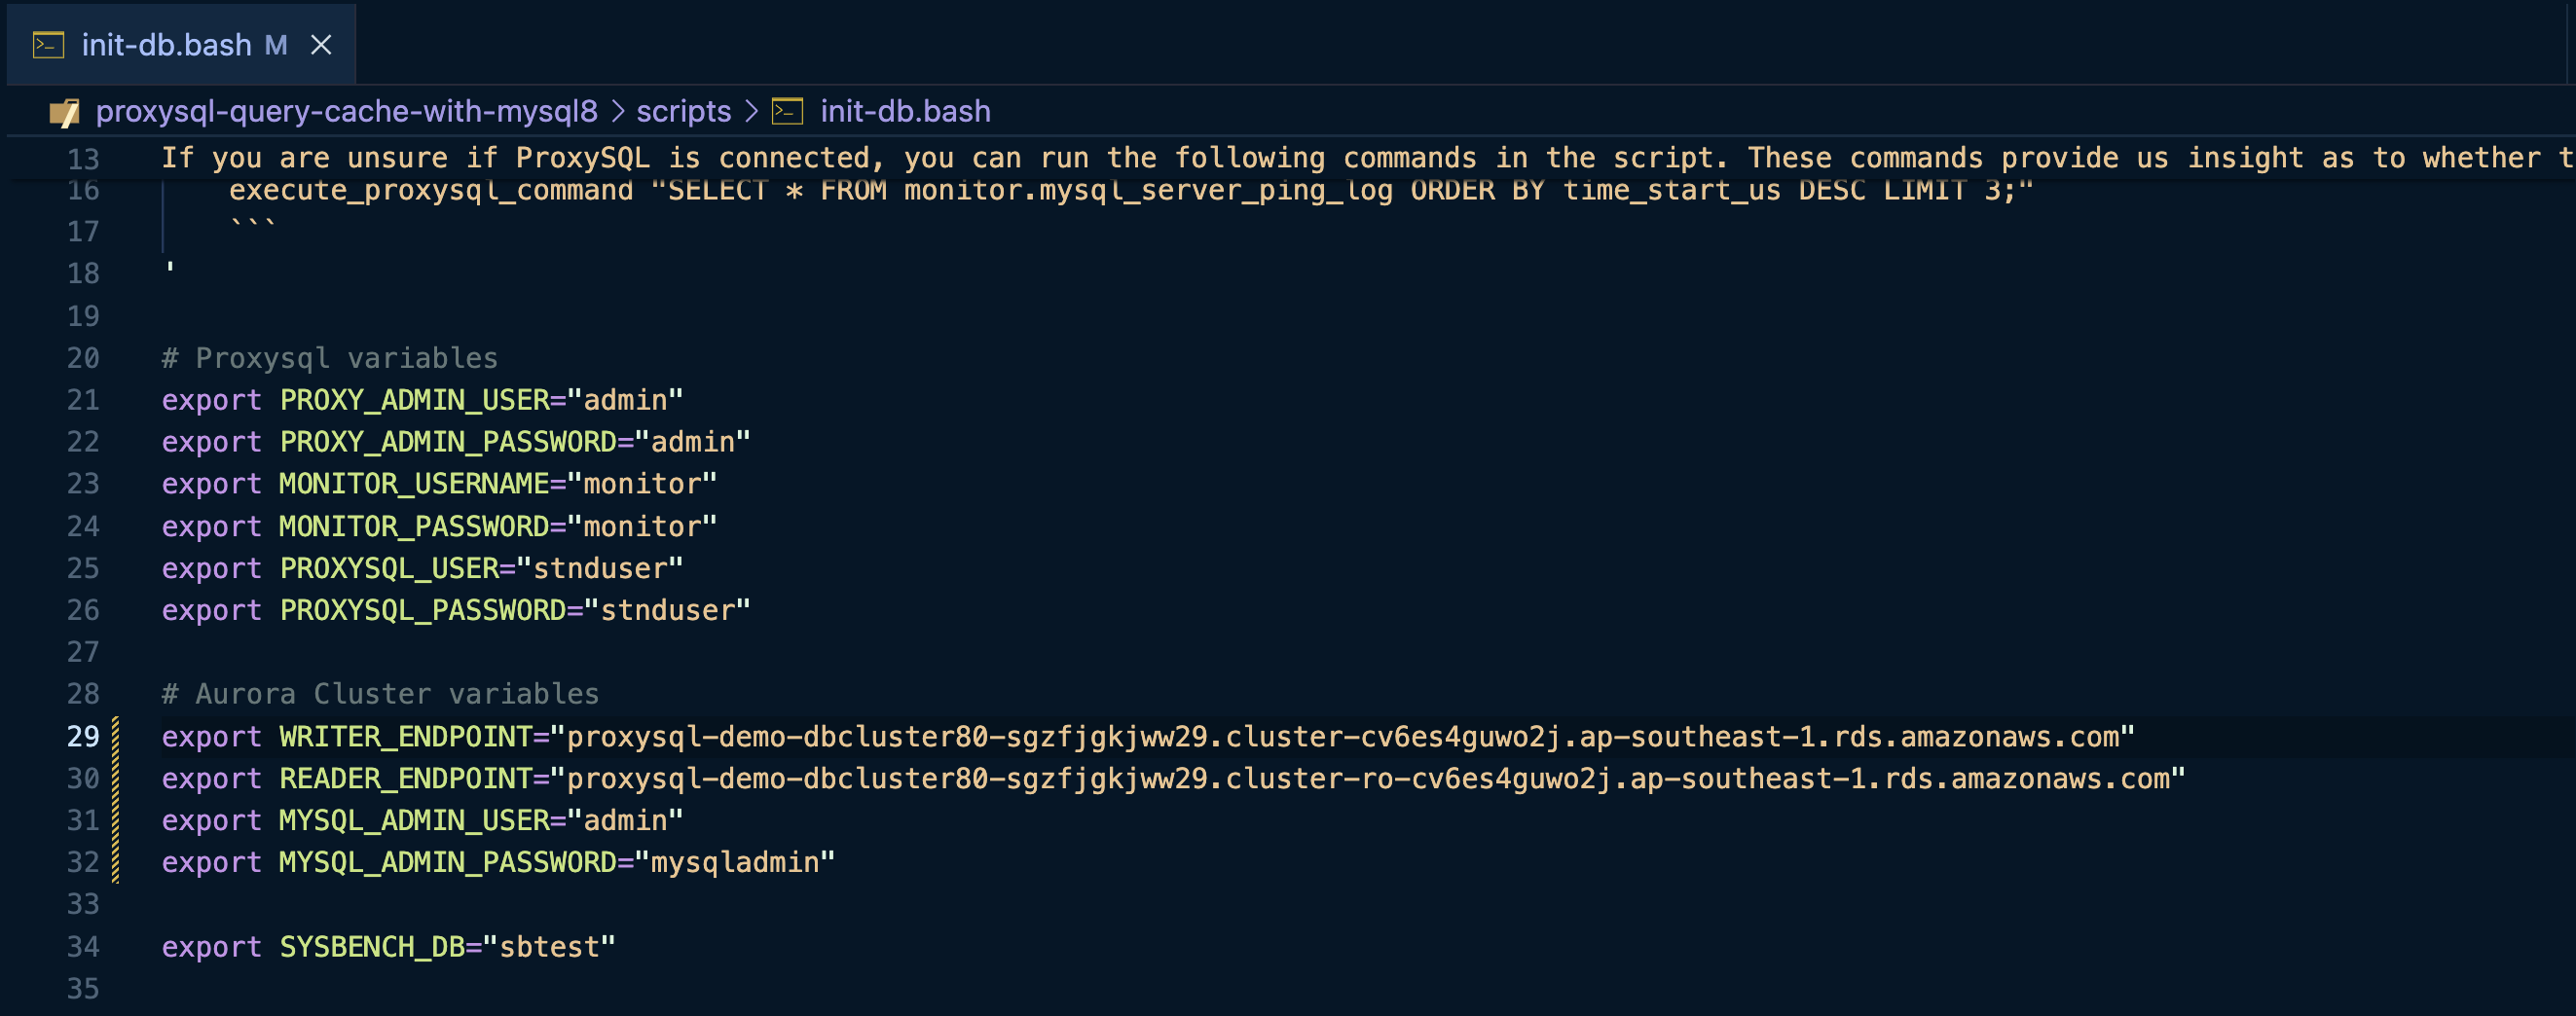 Credentials Example for Scripts/init-db.bash